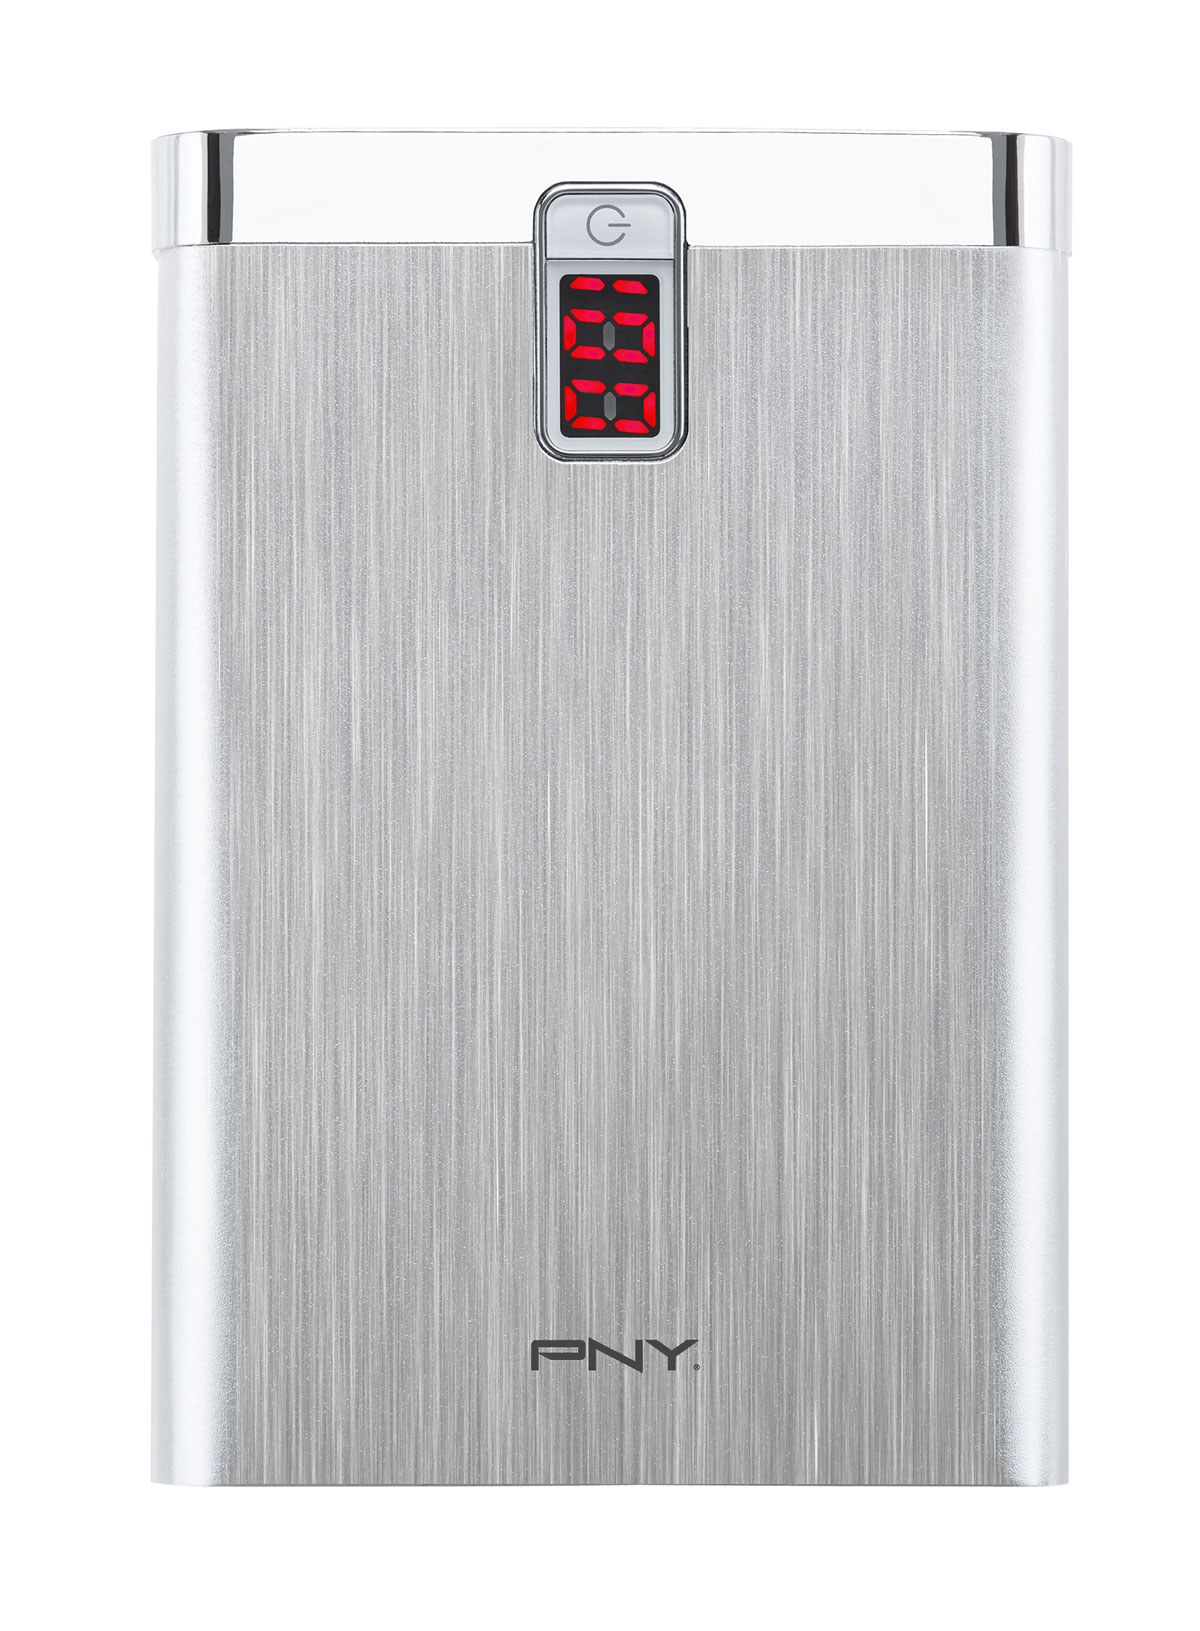 Le chargeur mobile PNY PowerPack 7800 mAh.